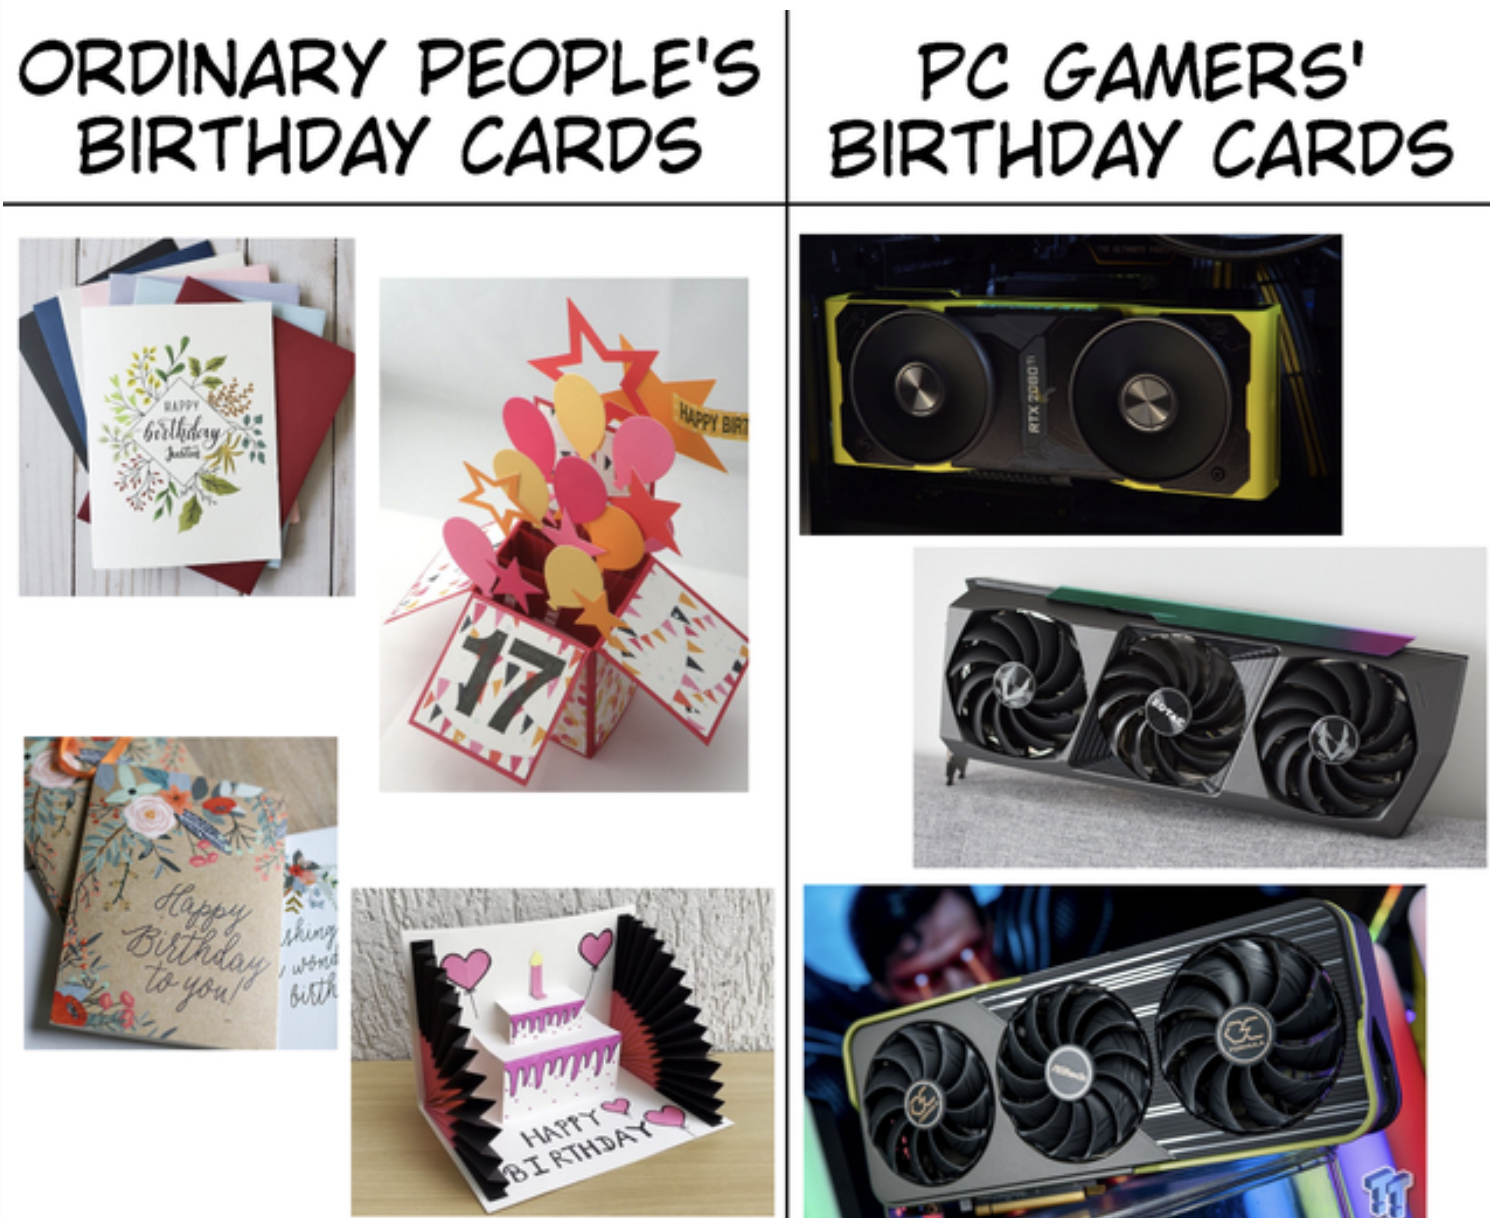 Gaming memes - fashion accessory - Ordinary People'S Birthday Cards birthday Jala Happy Birthday to you! thing wend 17 Mel wwww Happy Birthday Pc Gamers' Birthday Cards